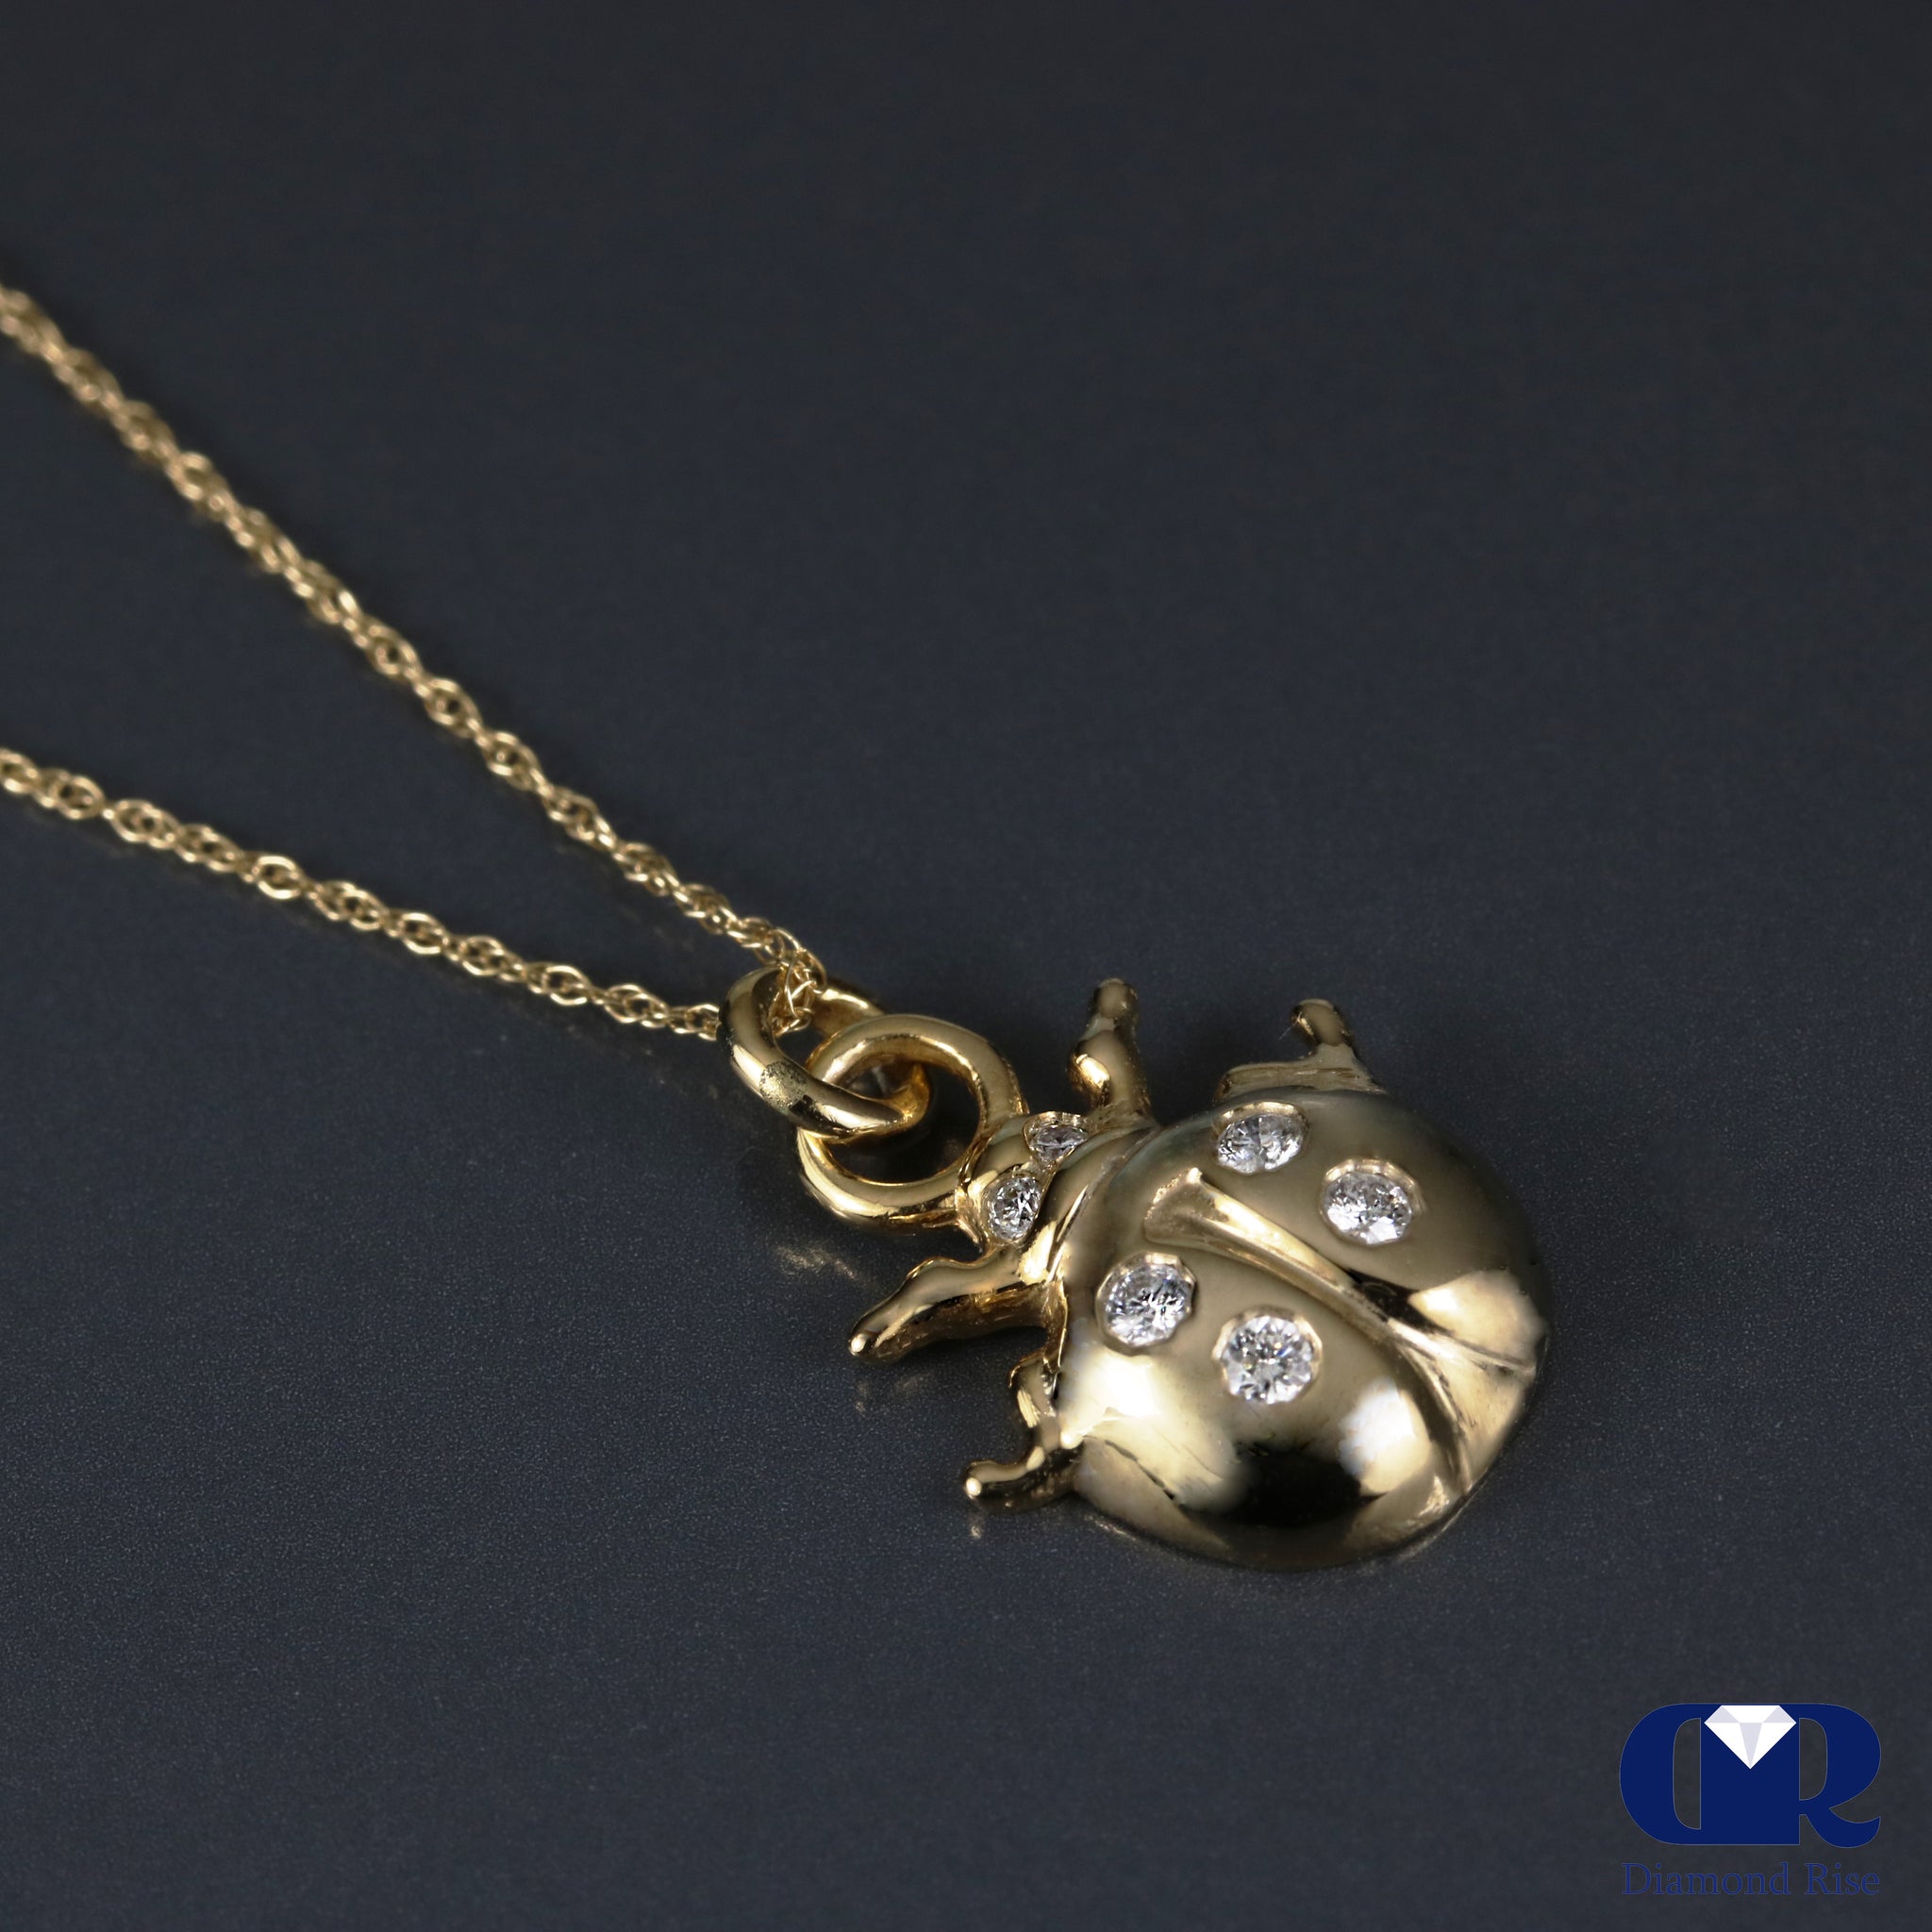 Pebble Necklace with Rose Gold Ladybug – EAT Gallery